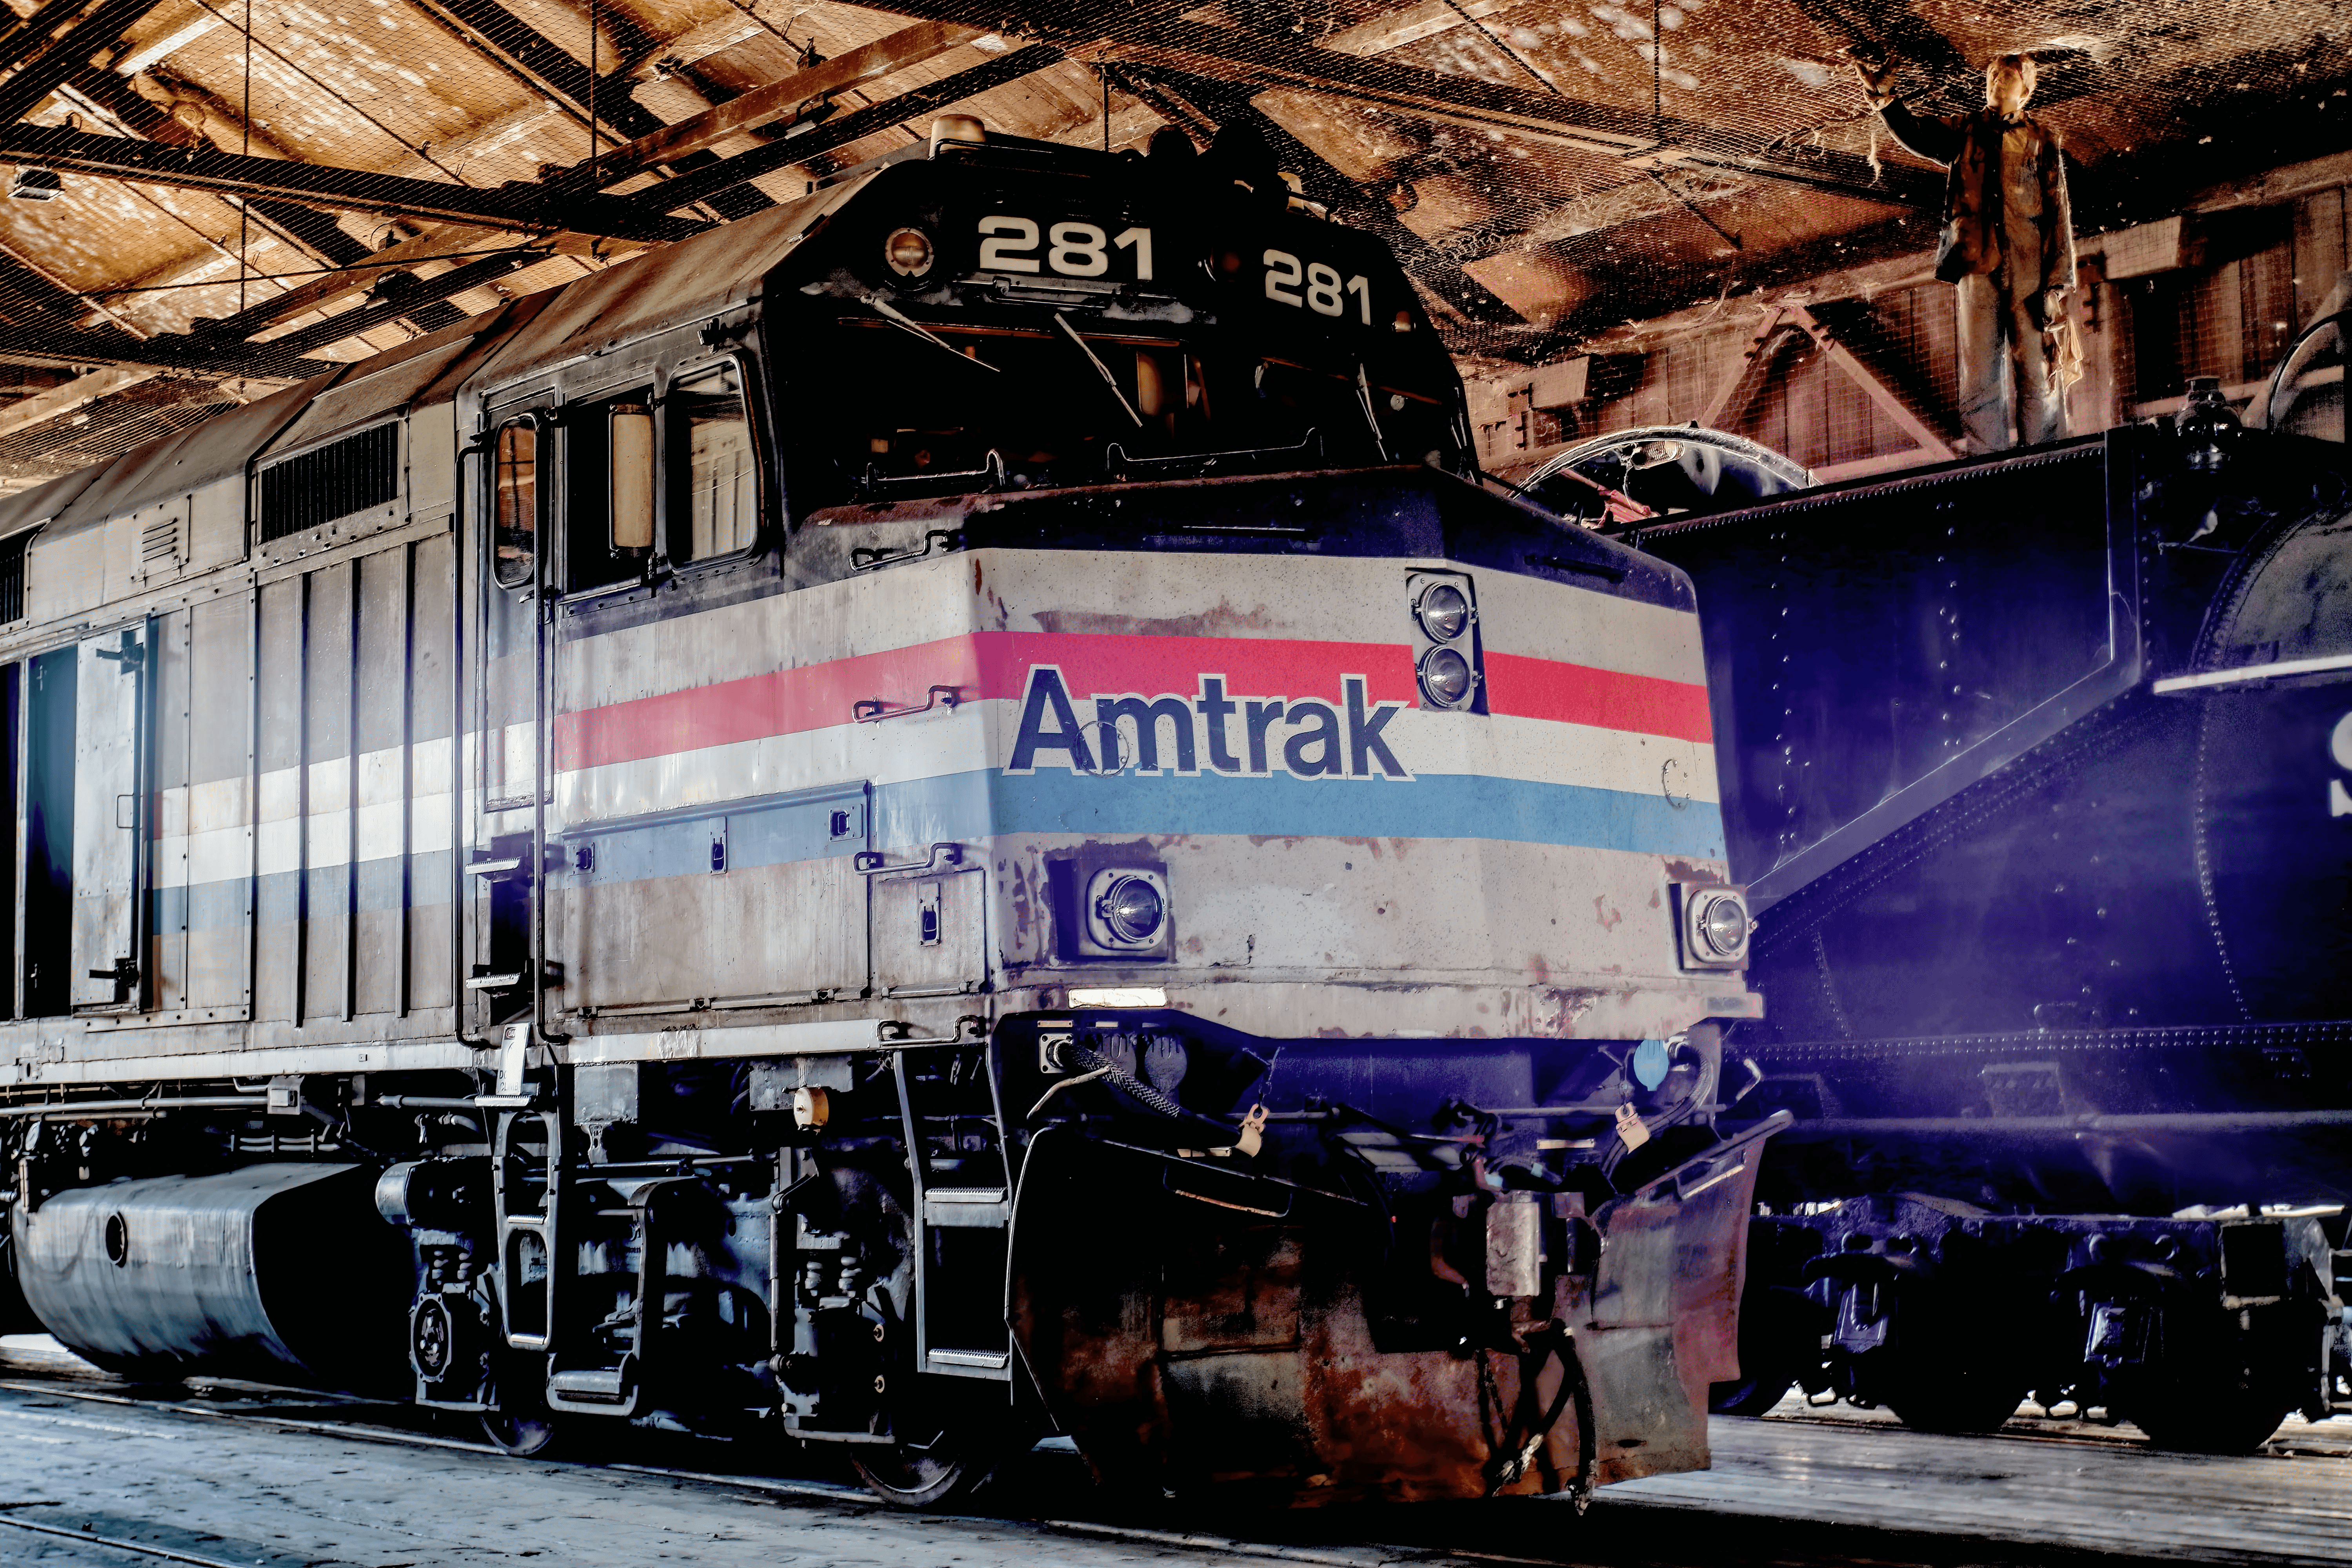 Historic Amtrak Trains in Old Sacramento. Image by Simon Hurry.